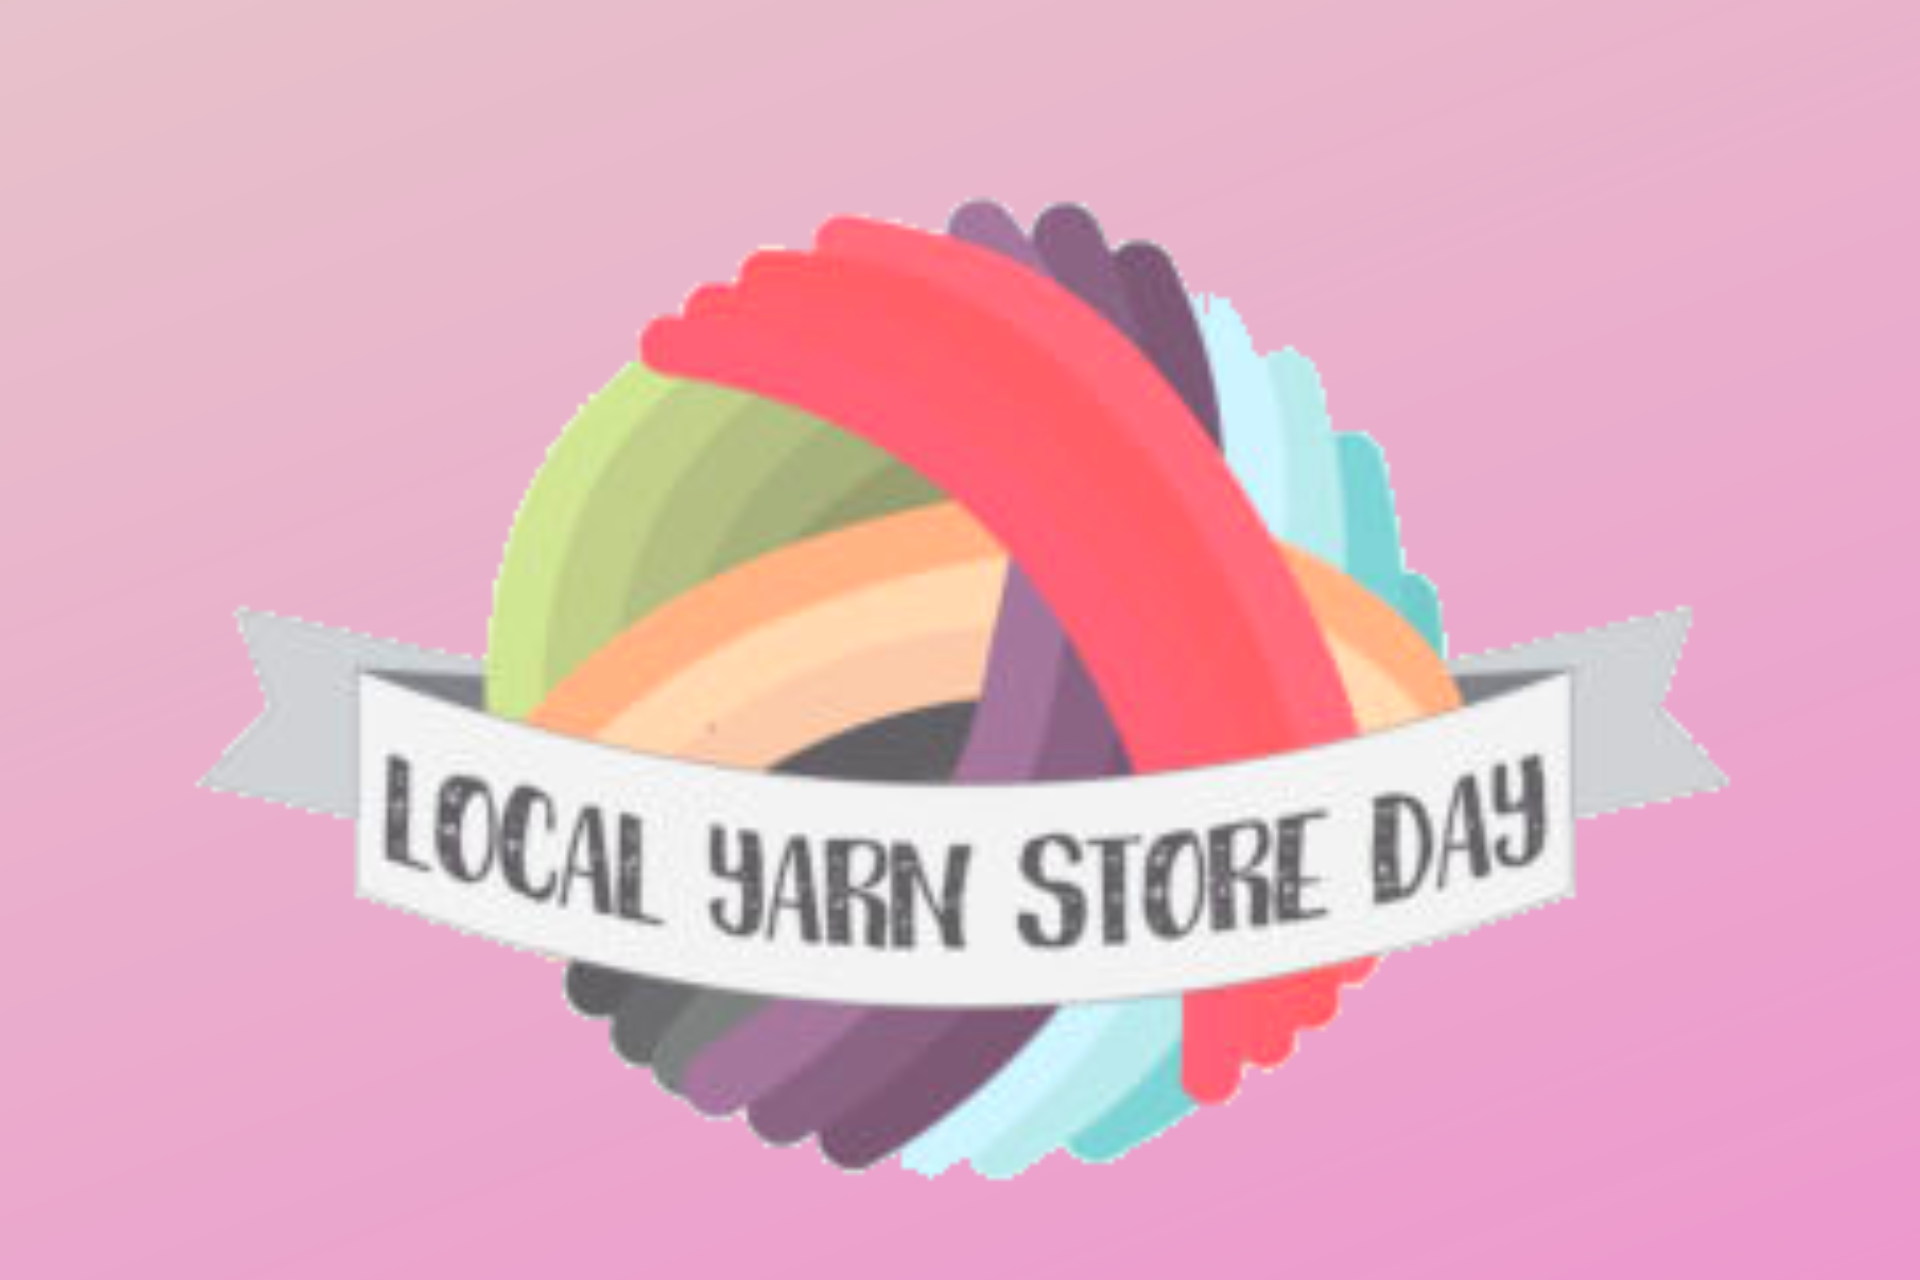 Celebrate Local Yarn Store Day with Us This Saturday!